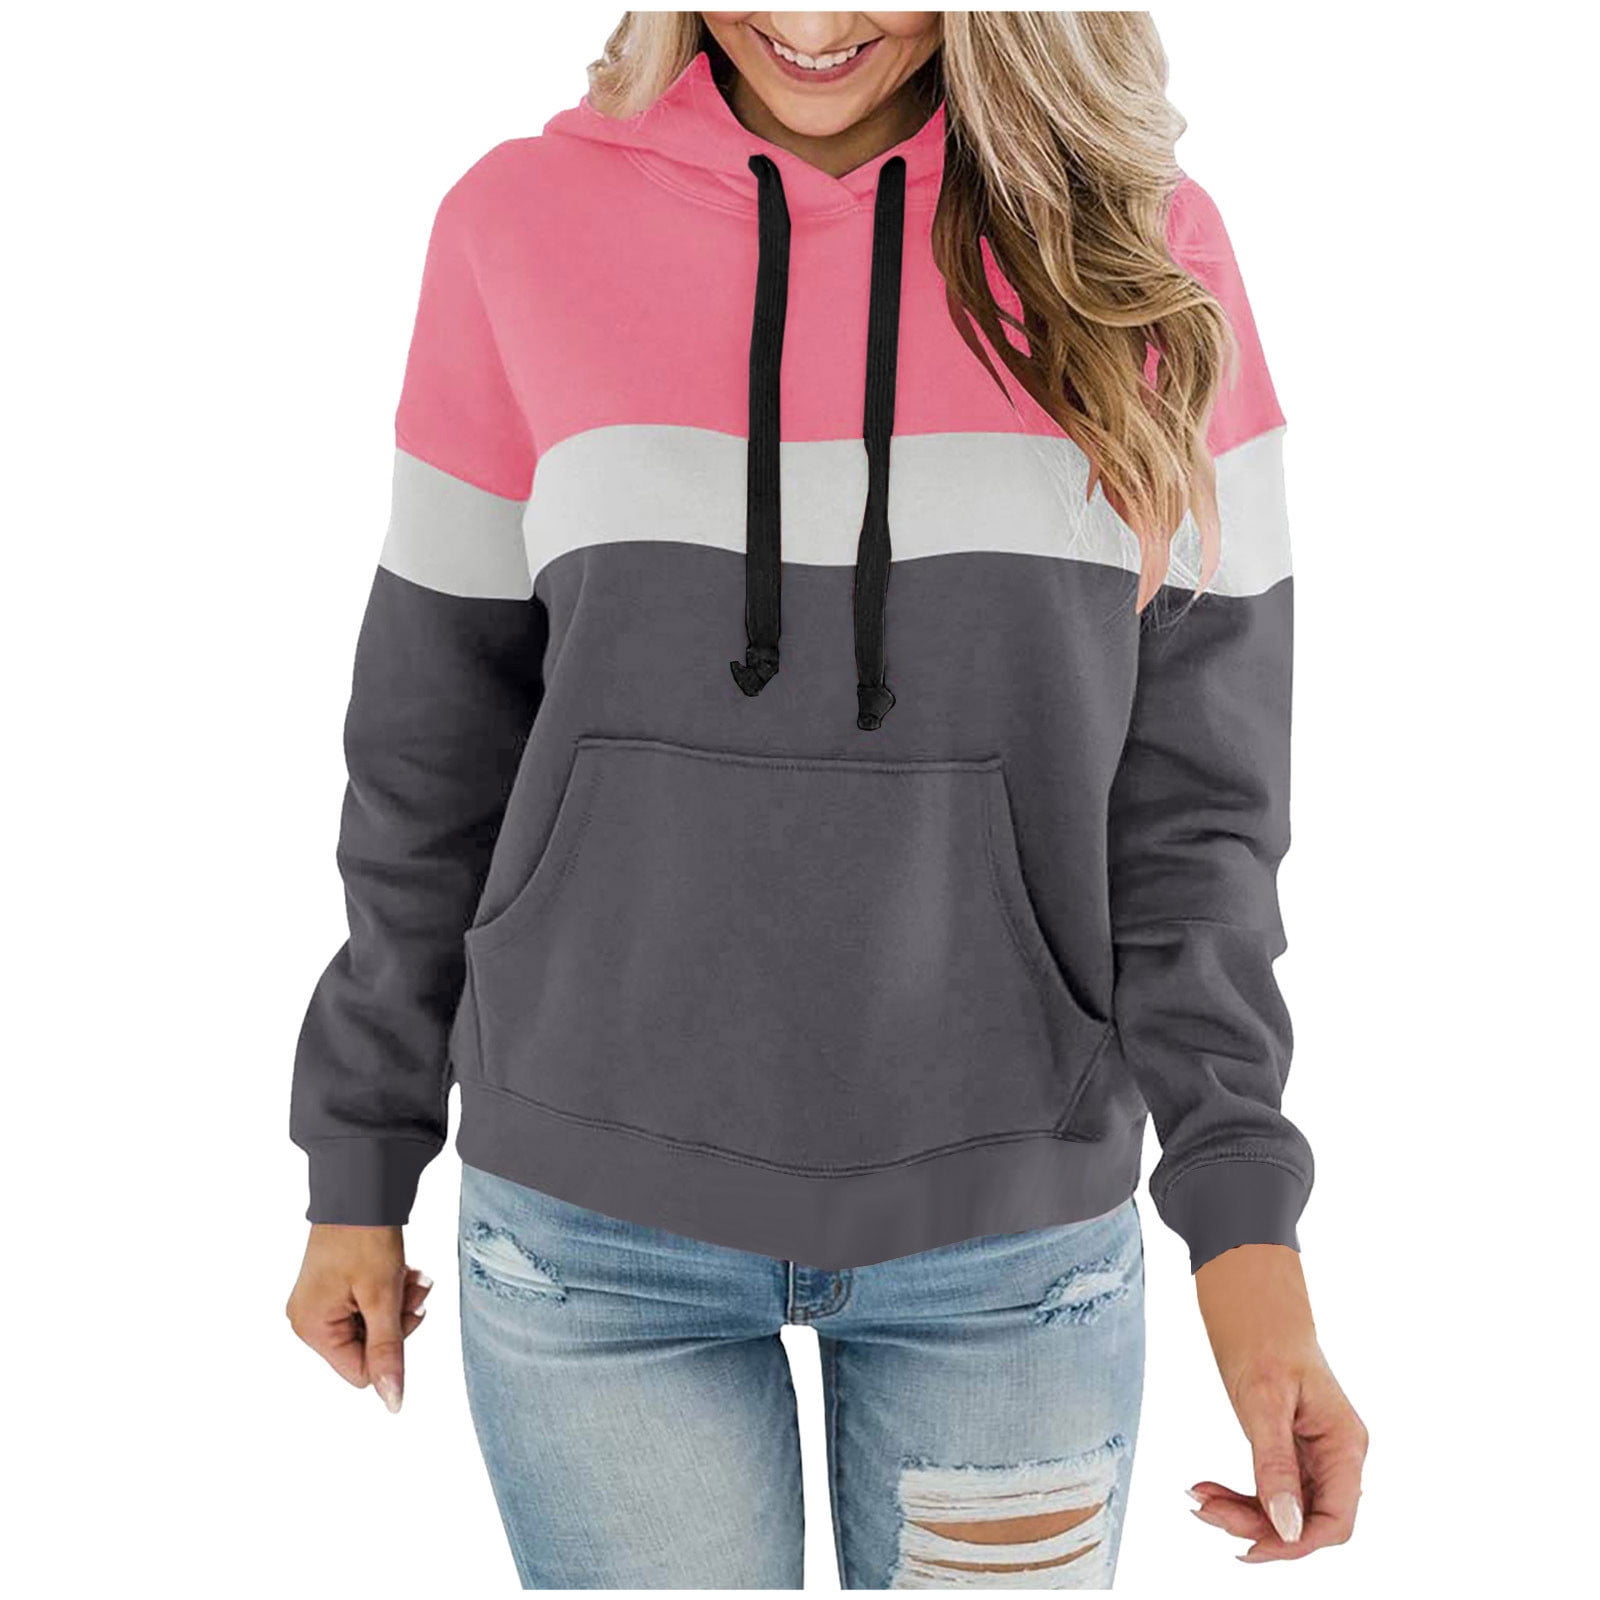 IHGFTRTH Women Casual Gradient Color Wave Print Hooded Pockets Sweatshirt  Vacuum,today's deals prime,deal days,wholesale items,under 1 dollar items  only